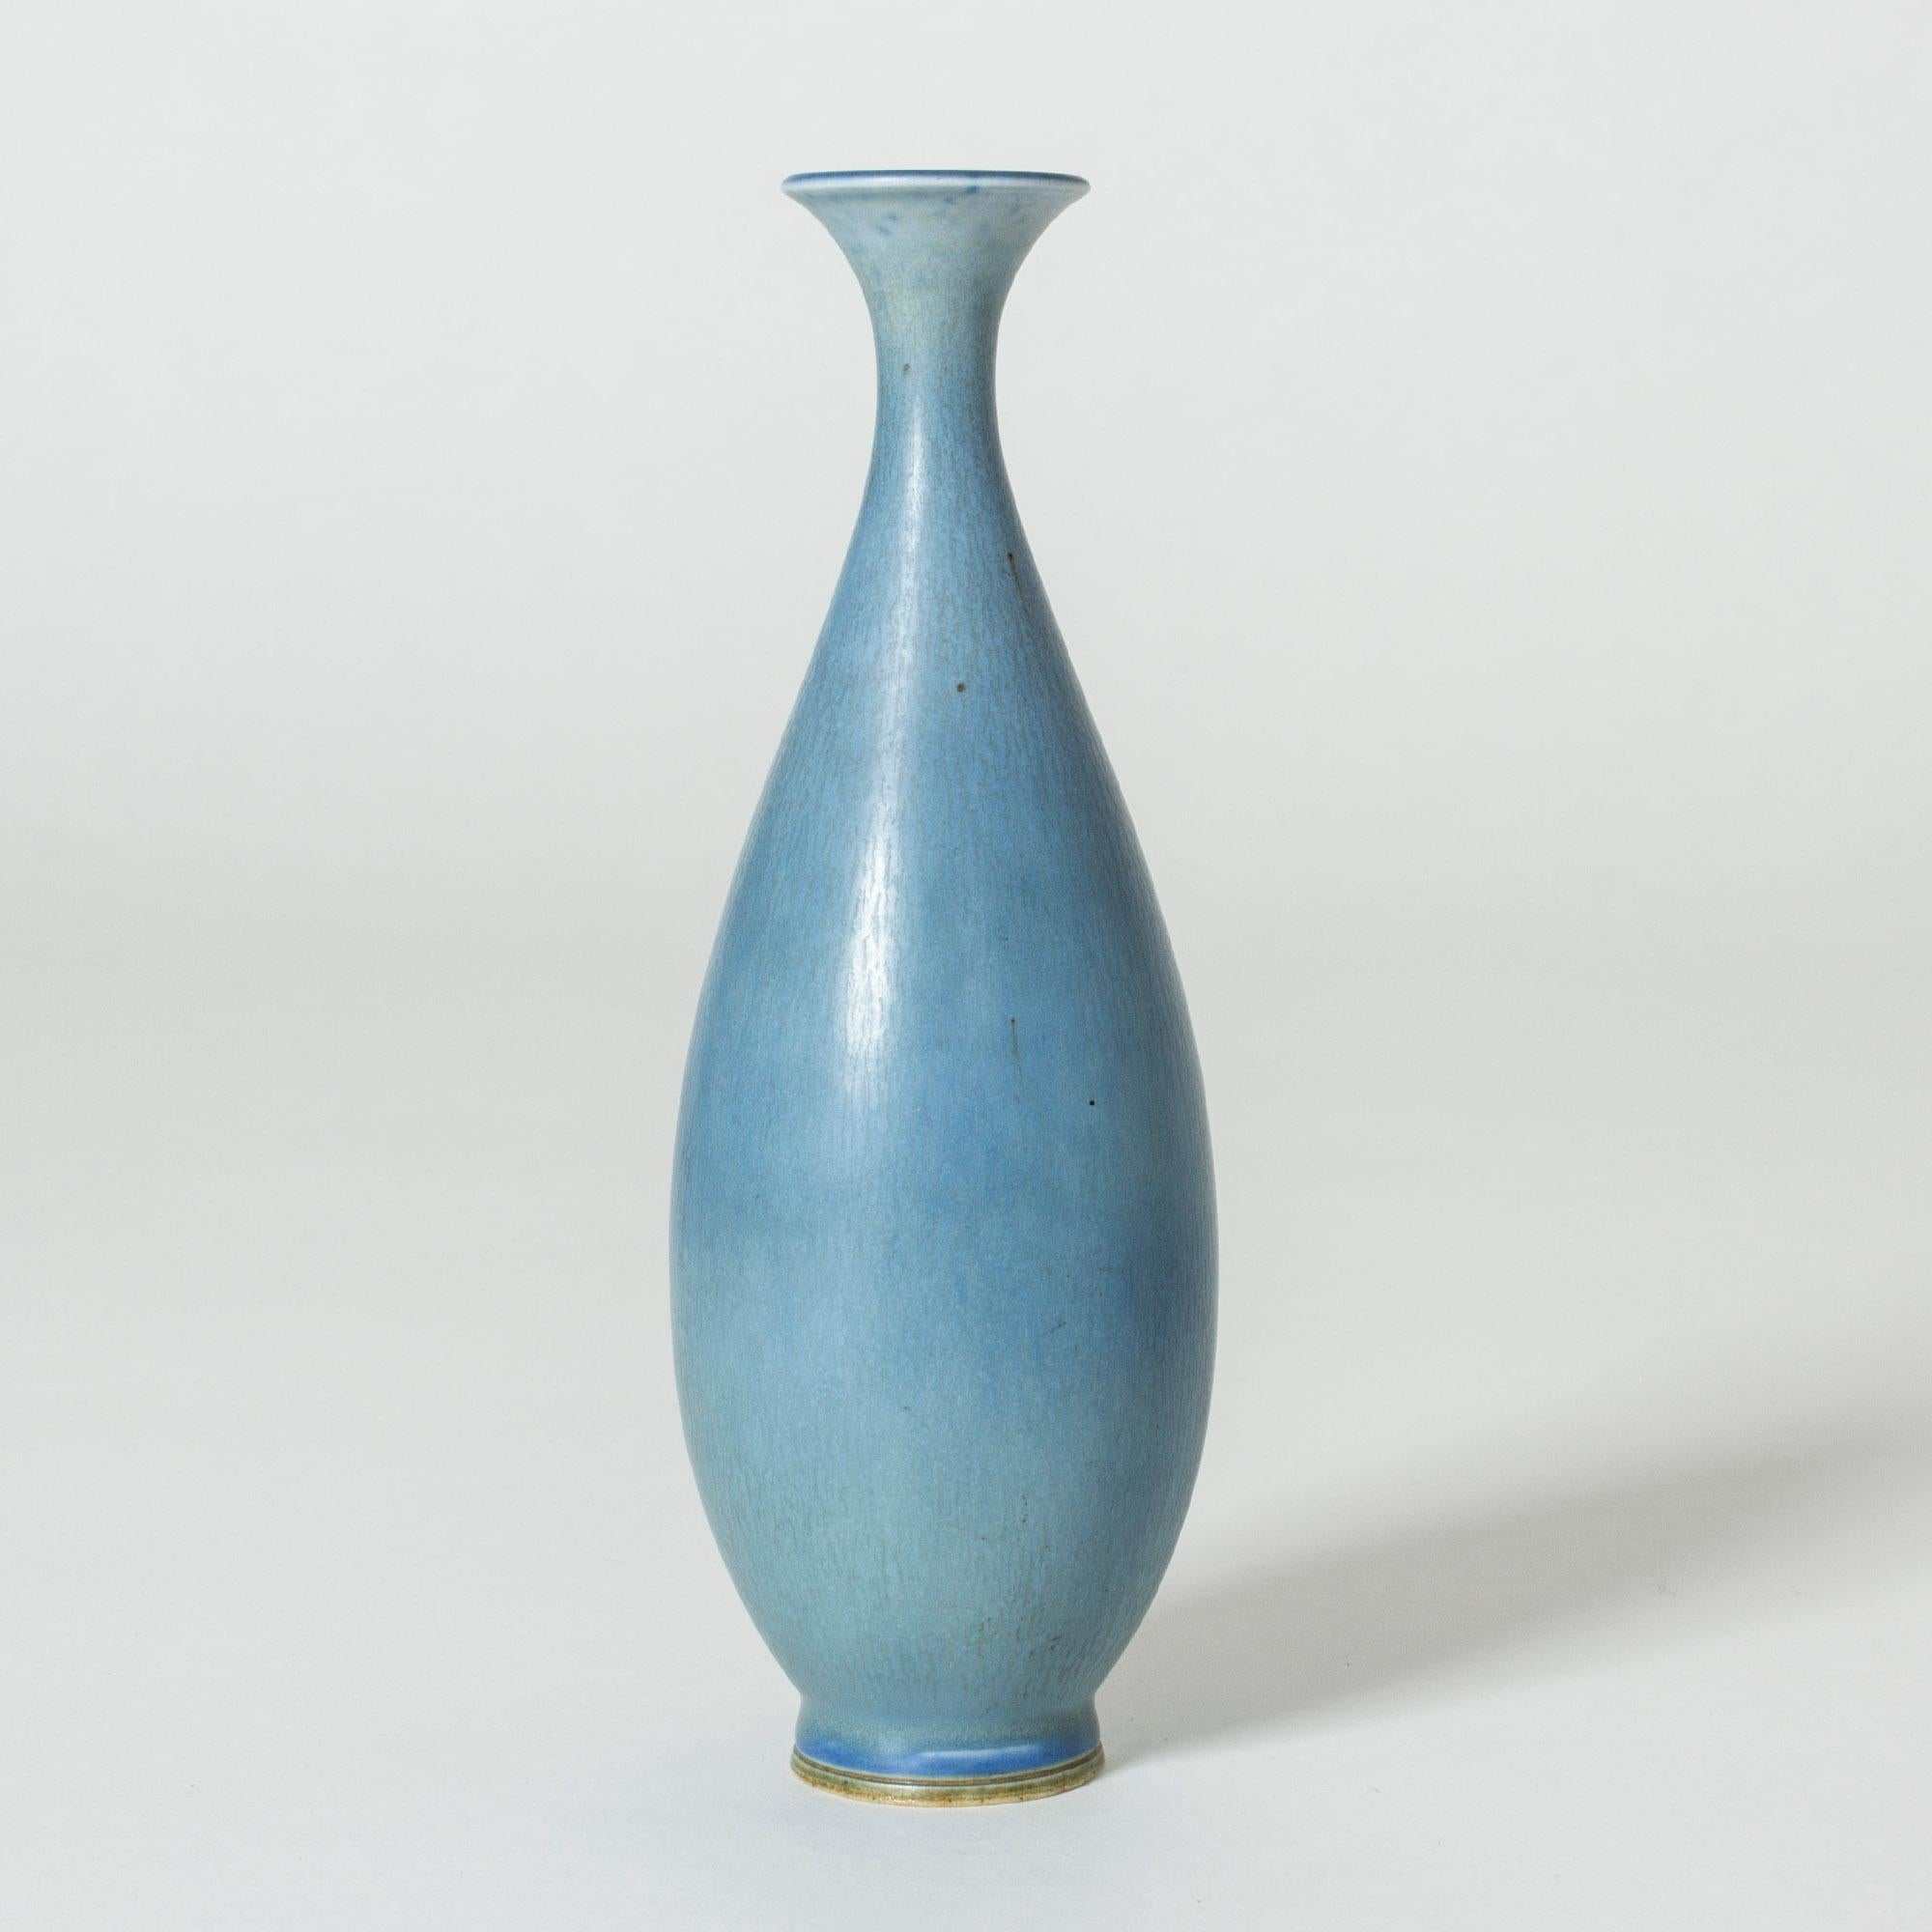 Beautiful stoneware vase by Berndt Friberg with smooth, soft lines. Pale blue hare’s fur glaze.